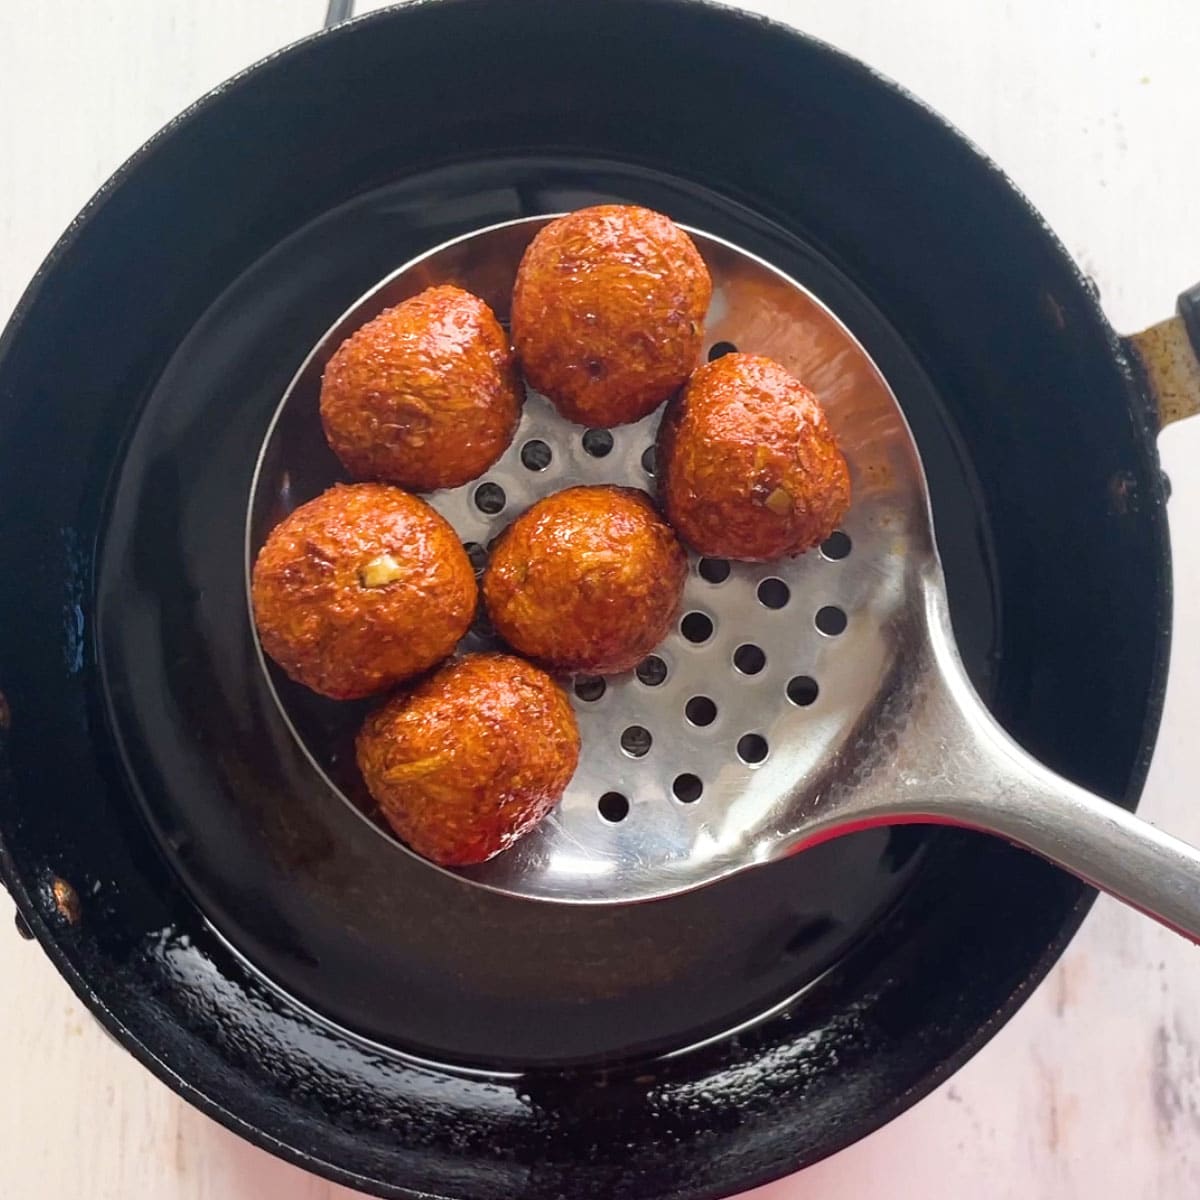 Fried Lauki balls in laddle